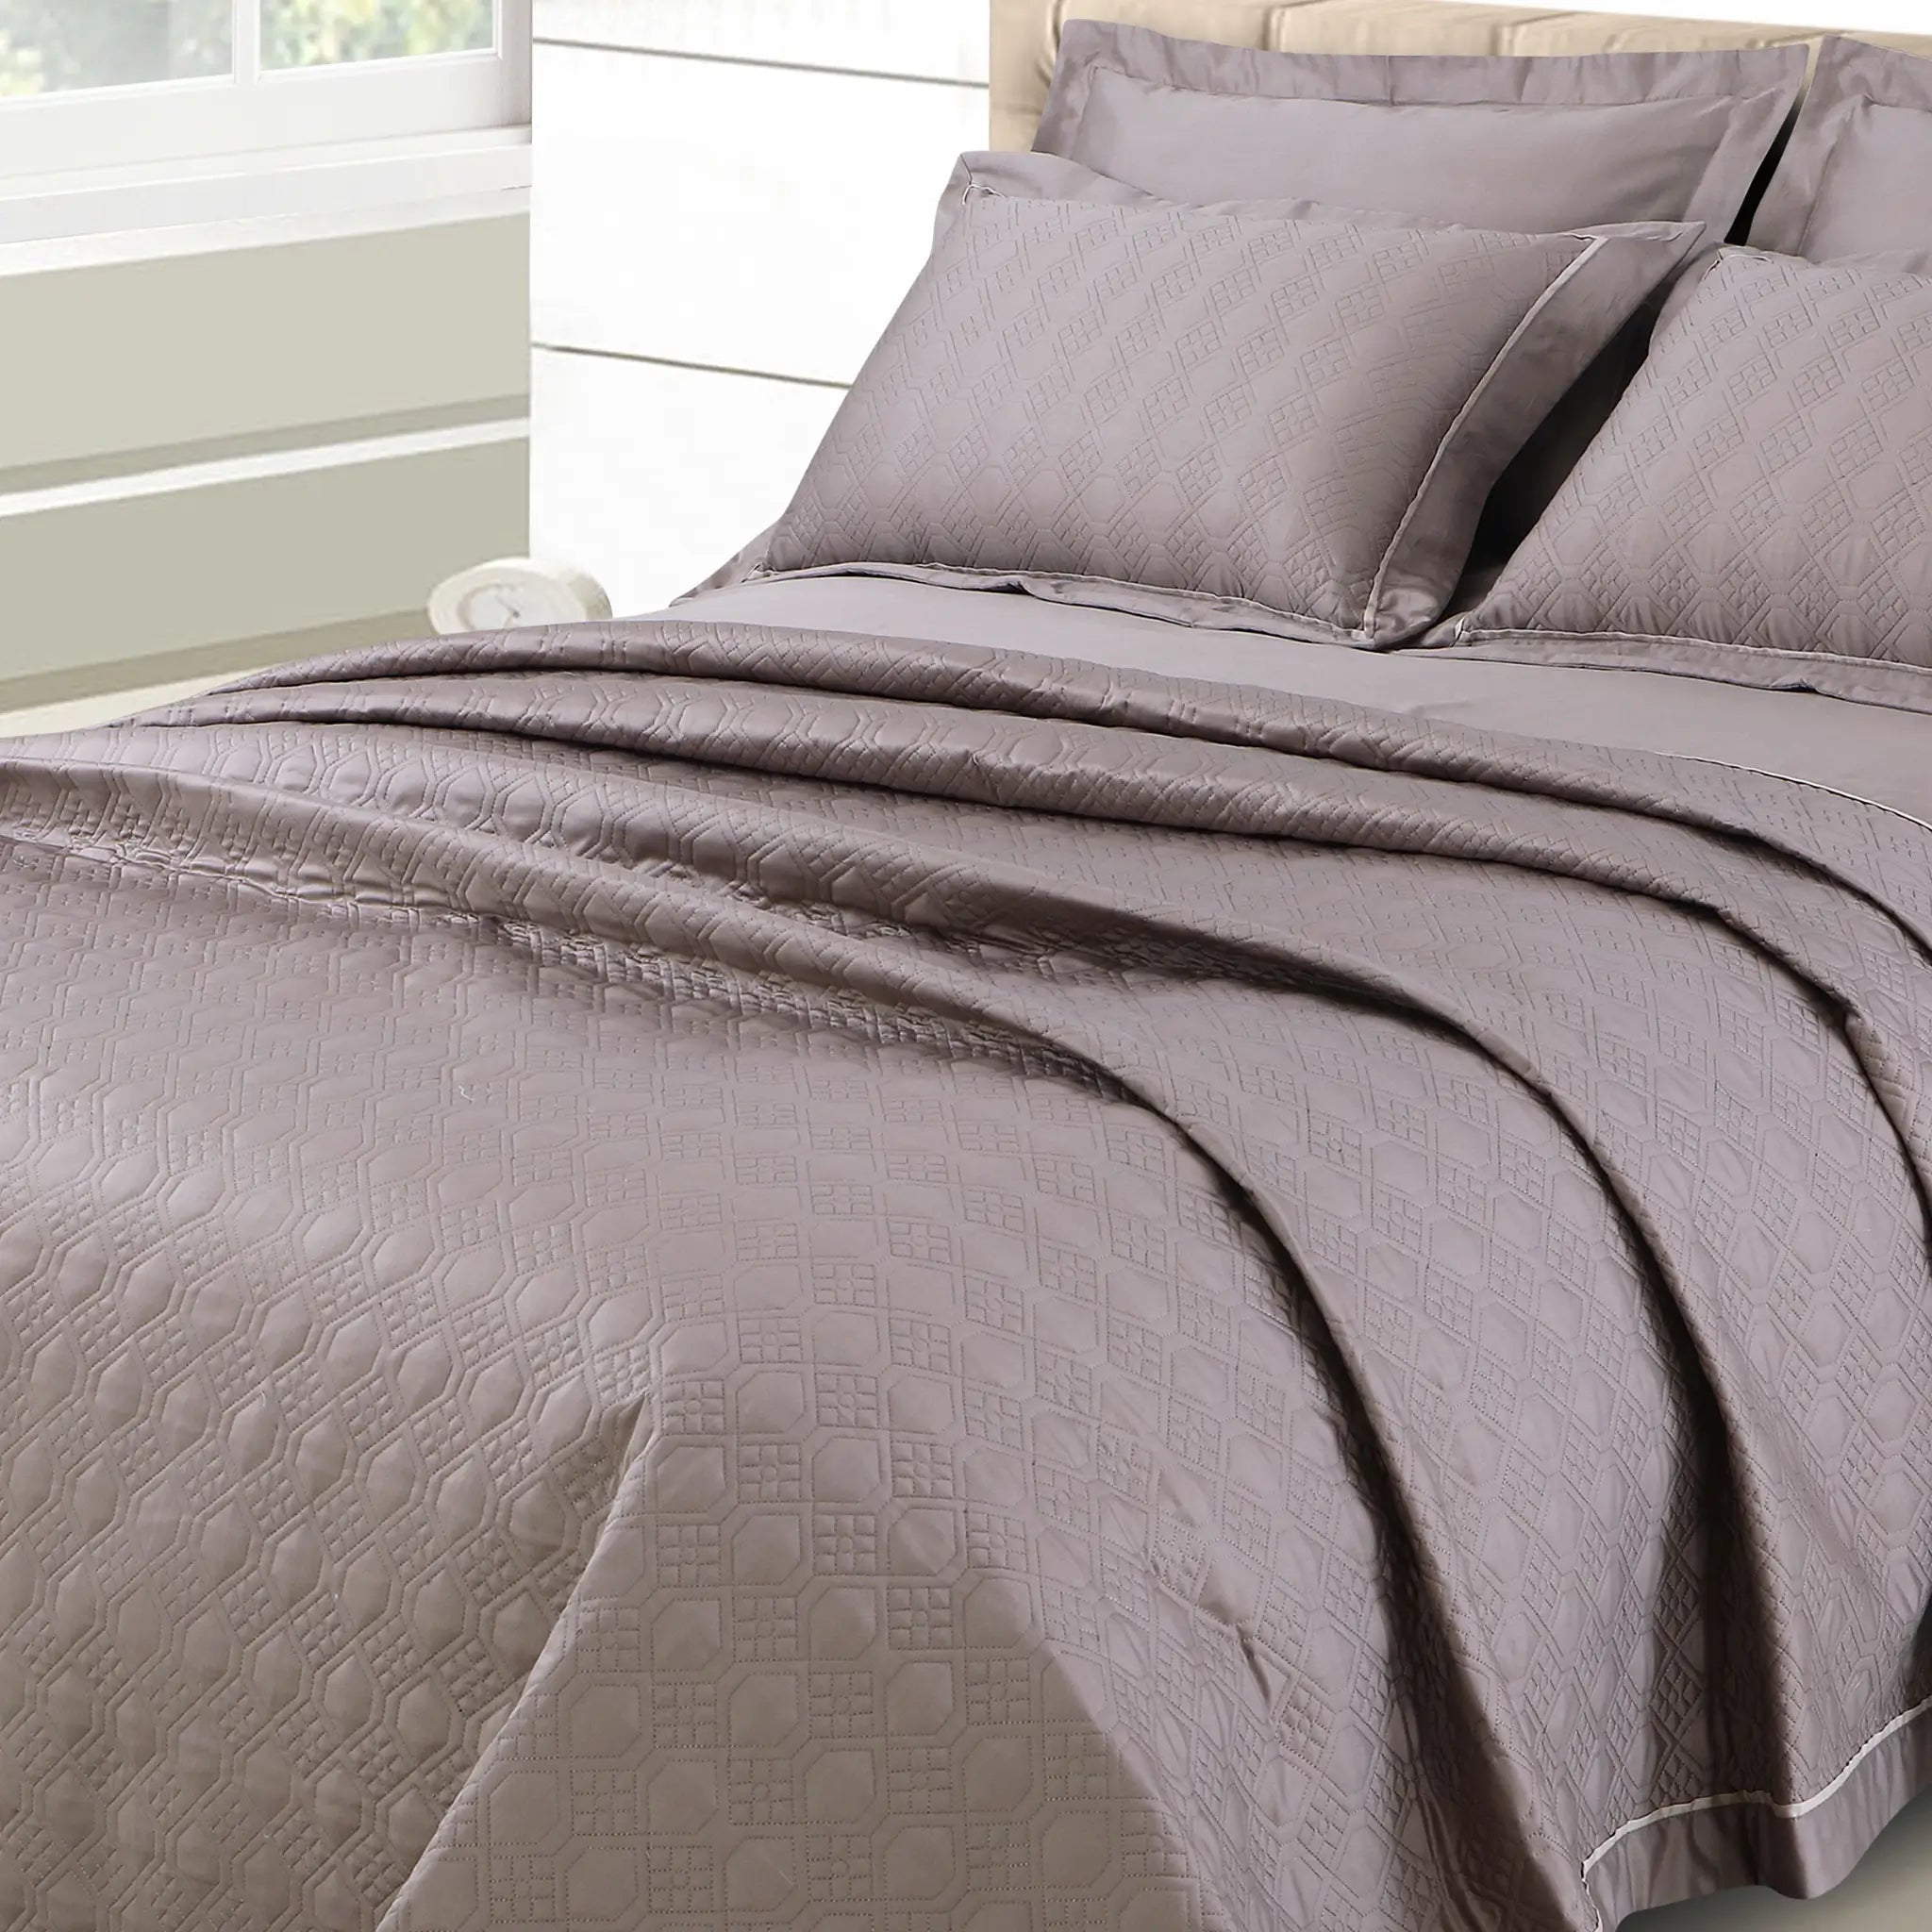 Malako Kairo 500 TC Taupe Brown Solid King Size 100% Cotton Quilted Bed Cover/Embroidered Bed Sheet Set - MALAKO